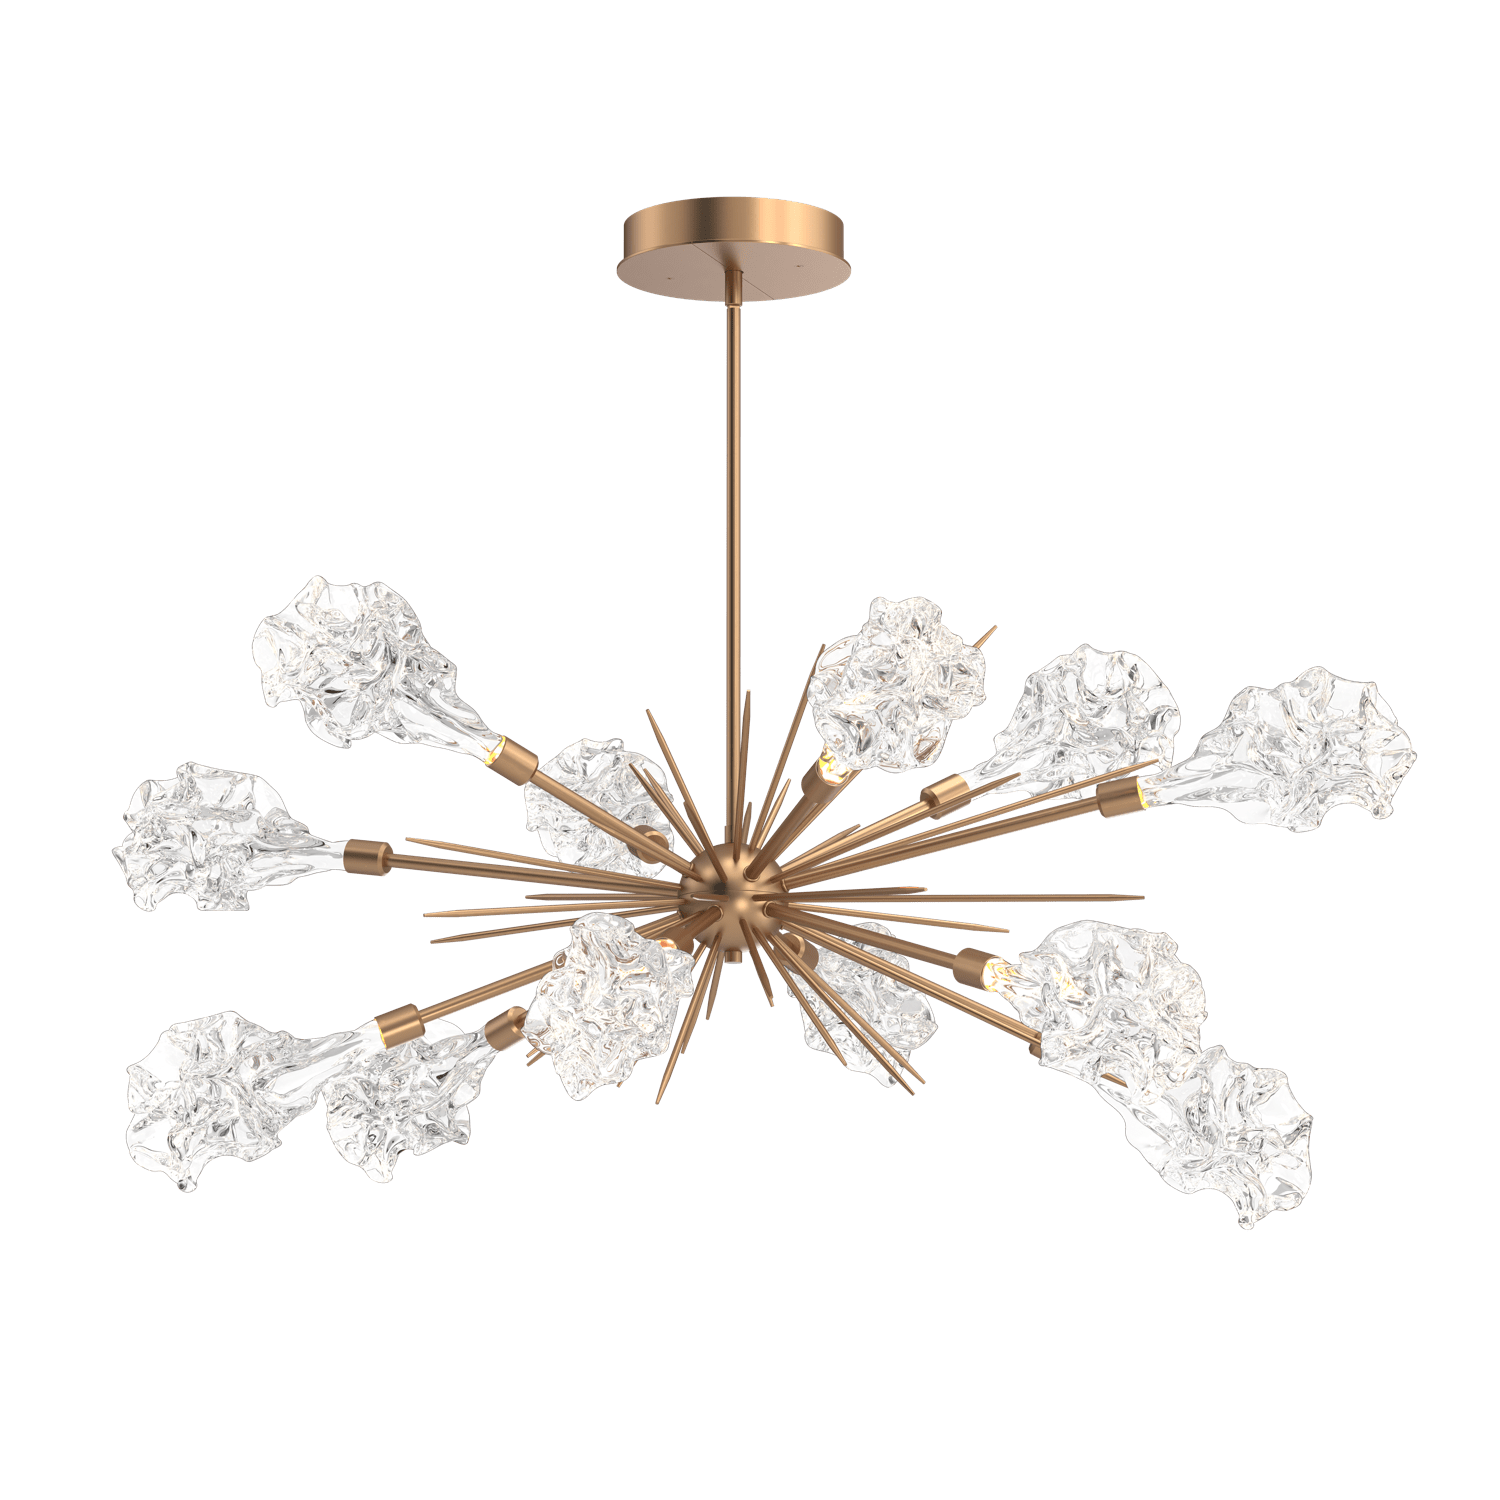 PLB0059-0A-NB-Hammerton-Studio-Blossom-47-inch-oval-starburst-chandelier-with-novel-brass-finish-and-clear-handblown-crystal-glass-shades-and-LED-lamping